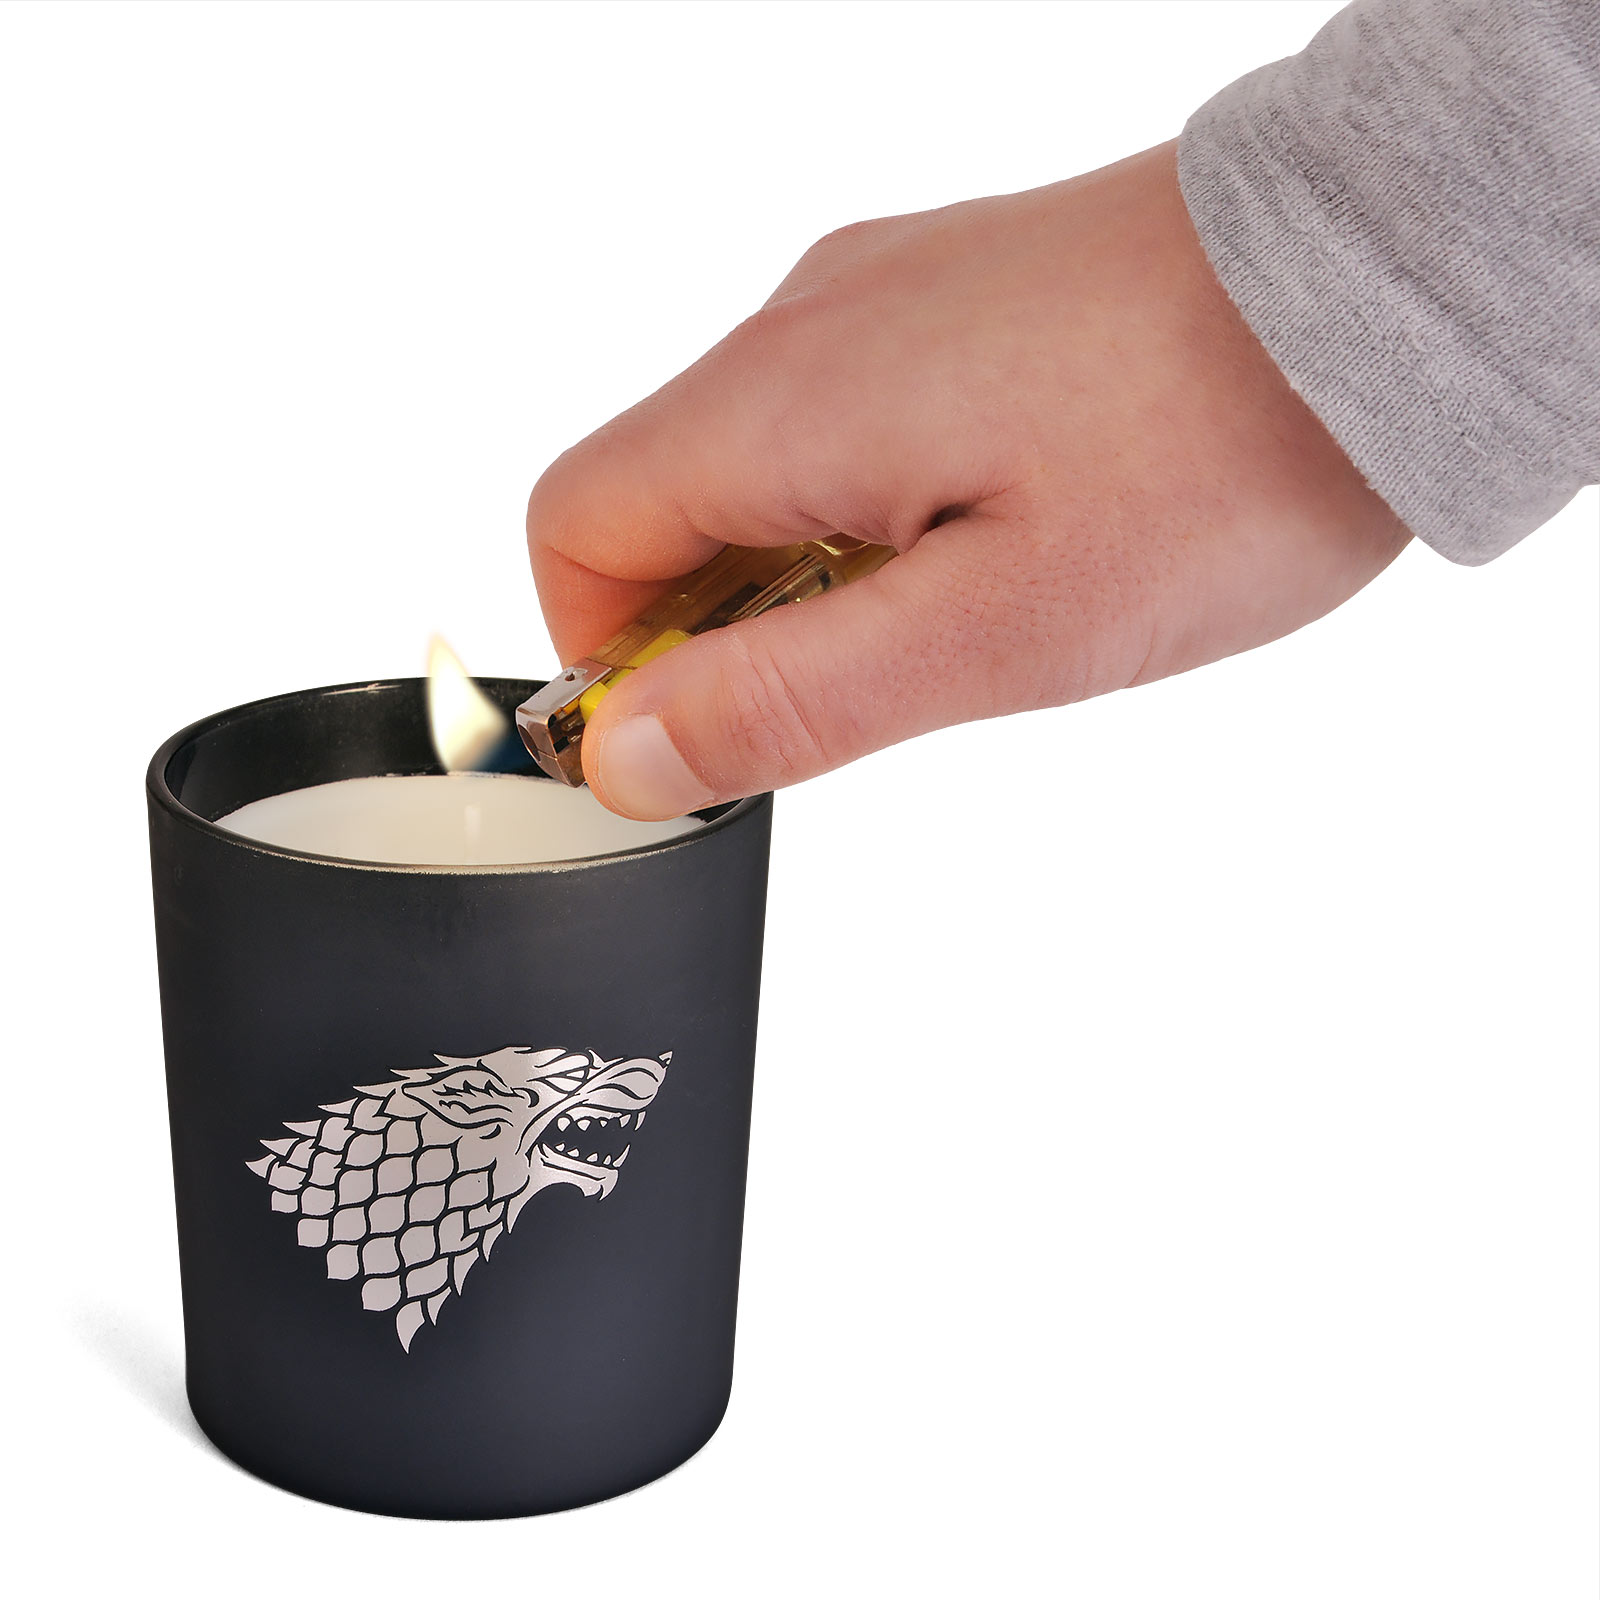 Game of Thrones - Stark Crest Candle in Glass